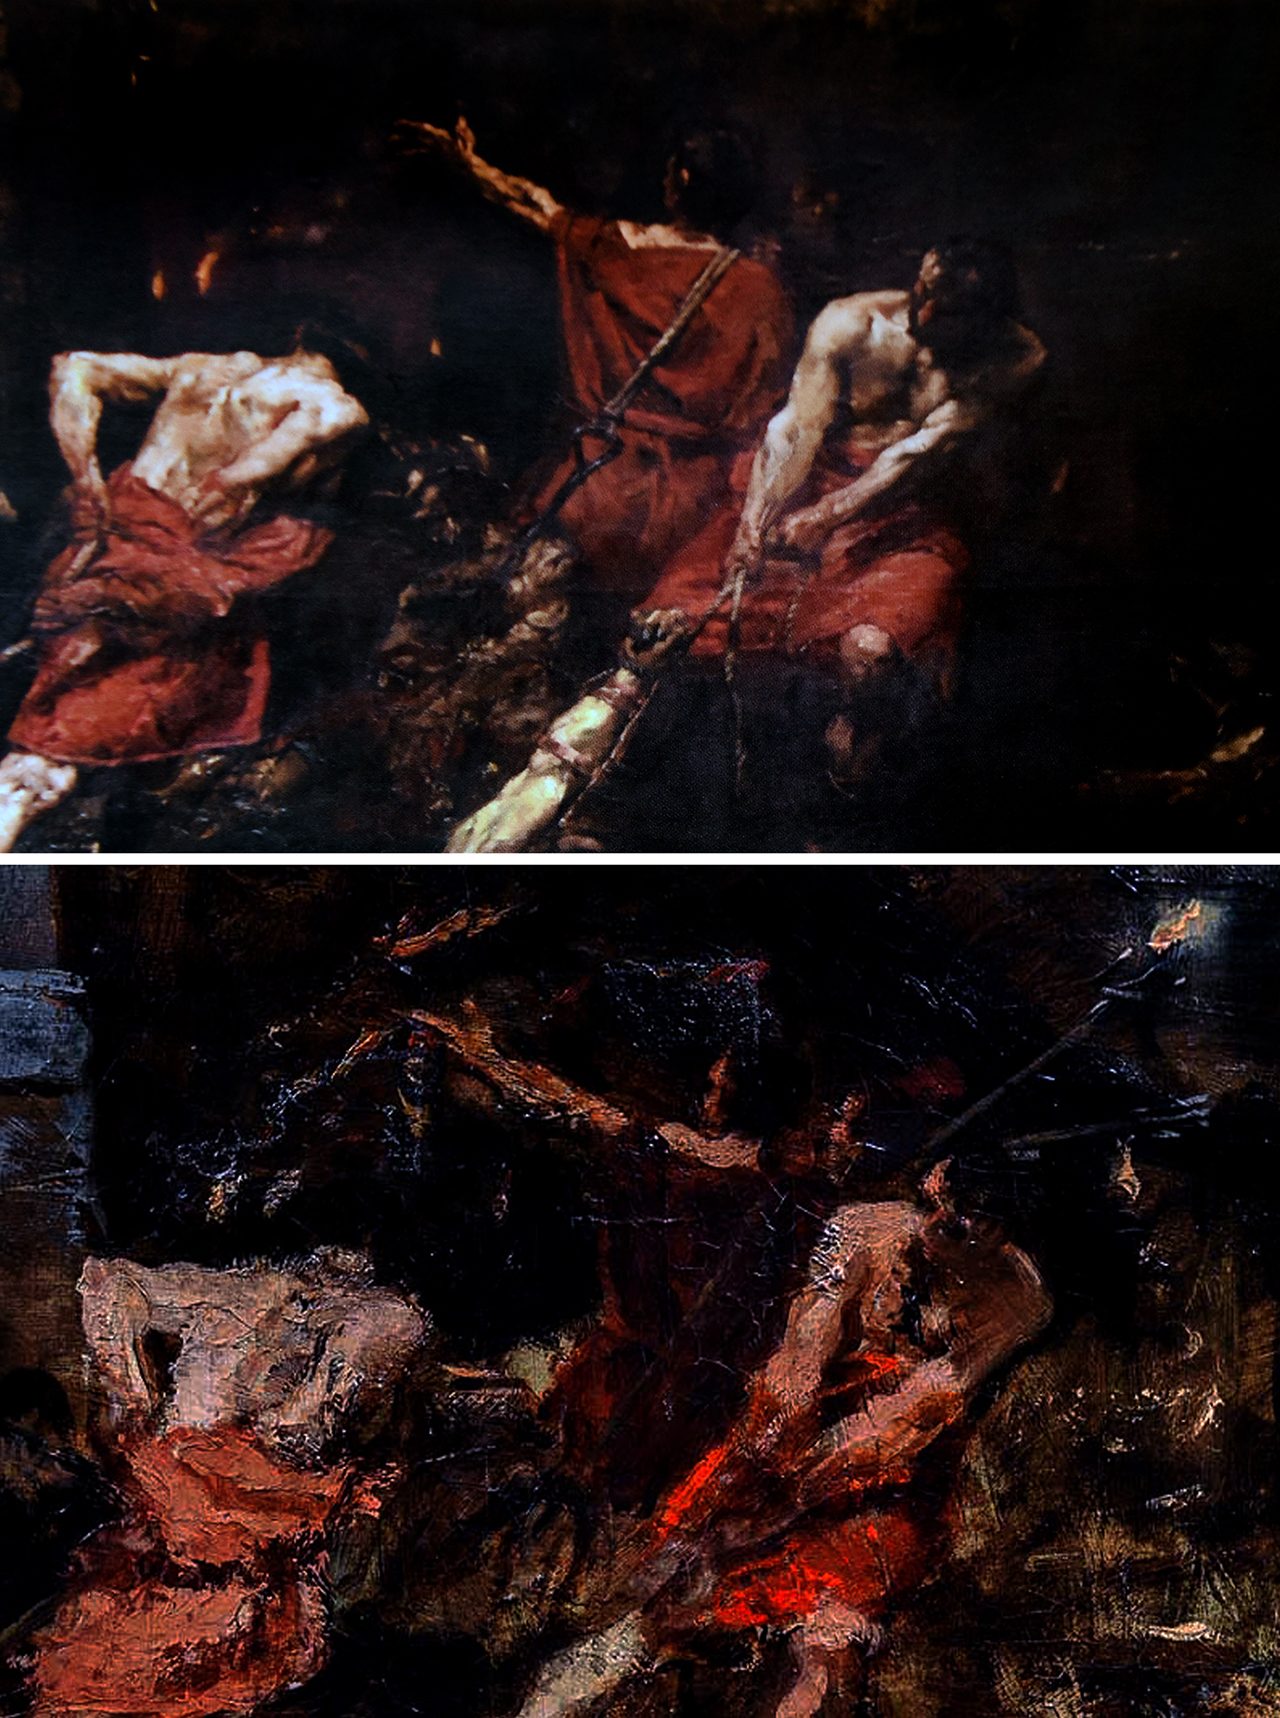  PLUS AND MINUS. One of the more immediately noticeable differences between the final and the boceto is the non-inclusion of the torch (upper right, bottom photo). It has been either intentionally removed or obscured. The profile of the man dressed in red tunic is turned differently in the iteration facing him father away from the viewer. The boceto (bottom) features no specific source of light as the focus is clearly in the organization of various elements.
  